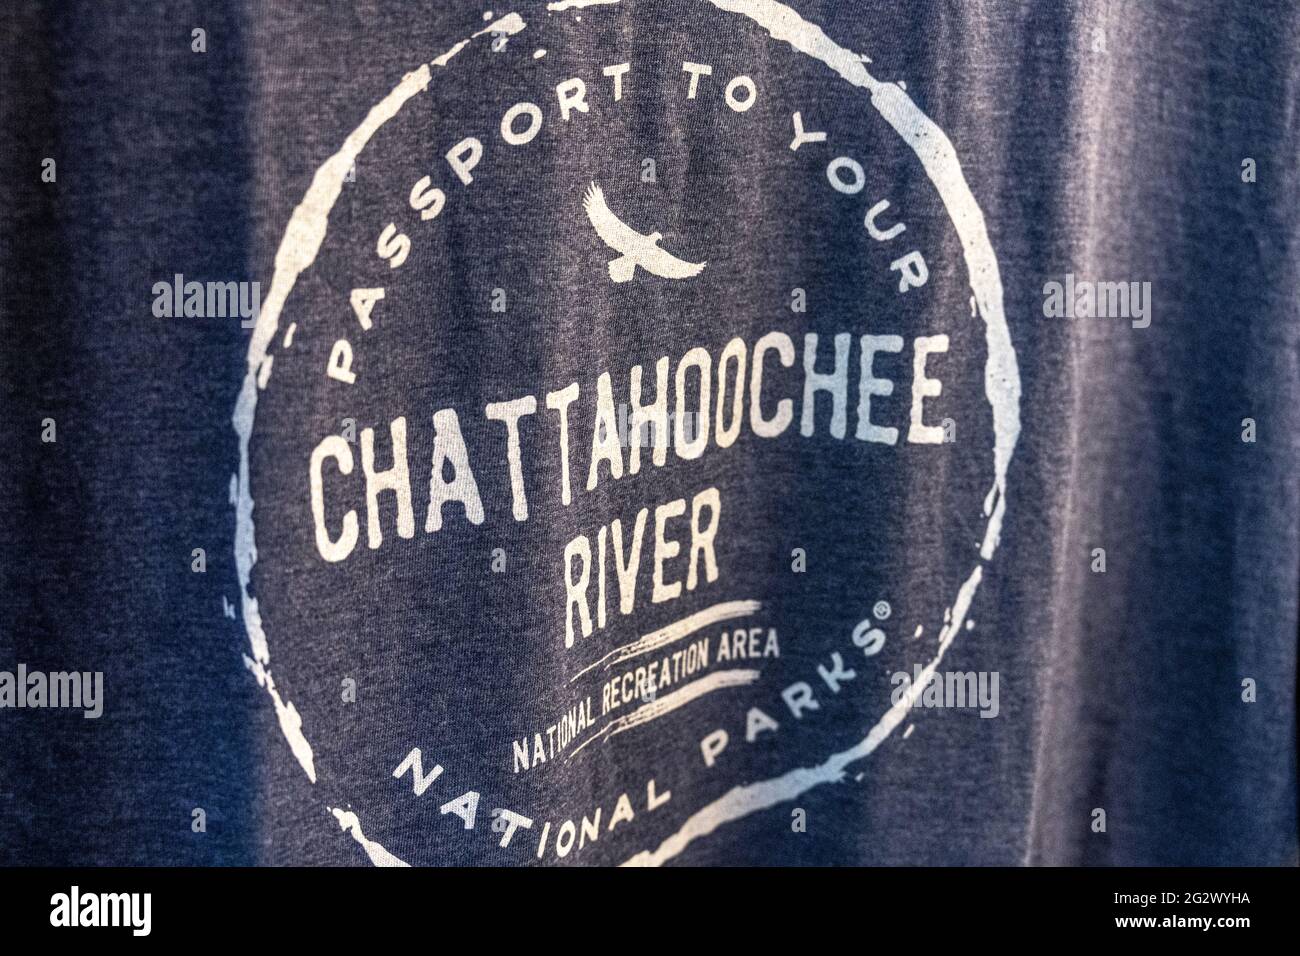 Souvenir t-shirt at the Island Ford Visitor Center of the Chattahoochee River National Recreation Area in Sandy Springs, Georgia. (USA) Stock Photo